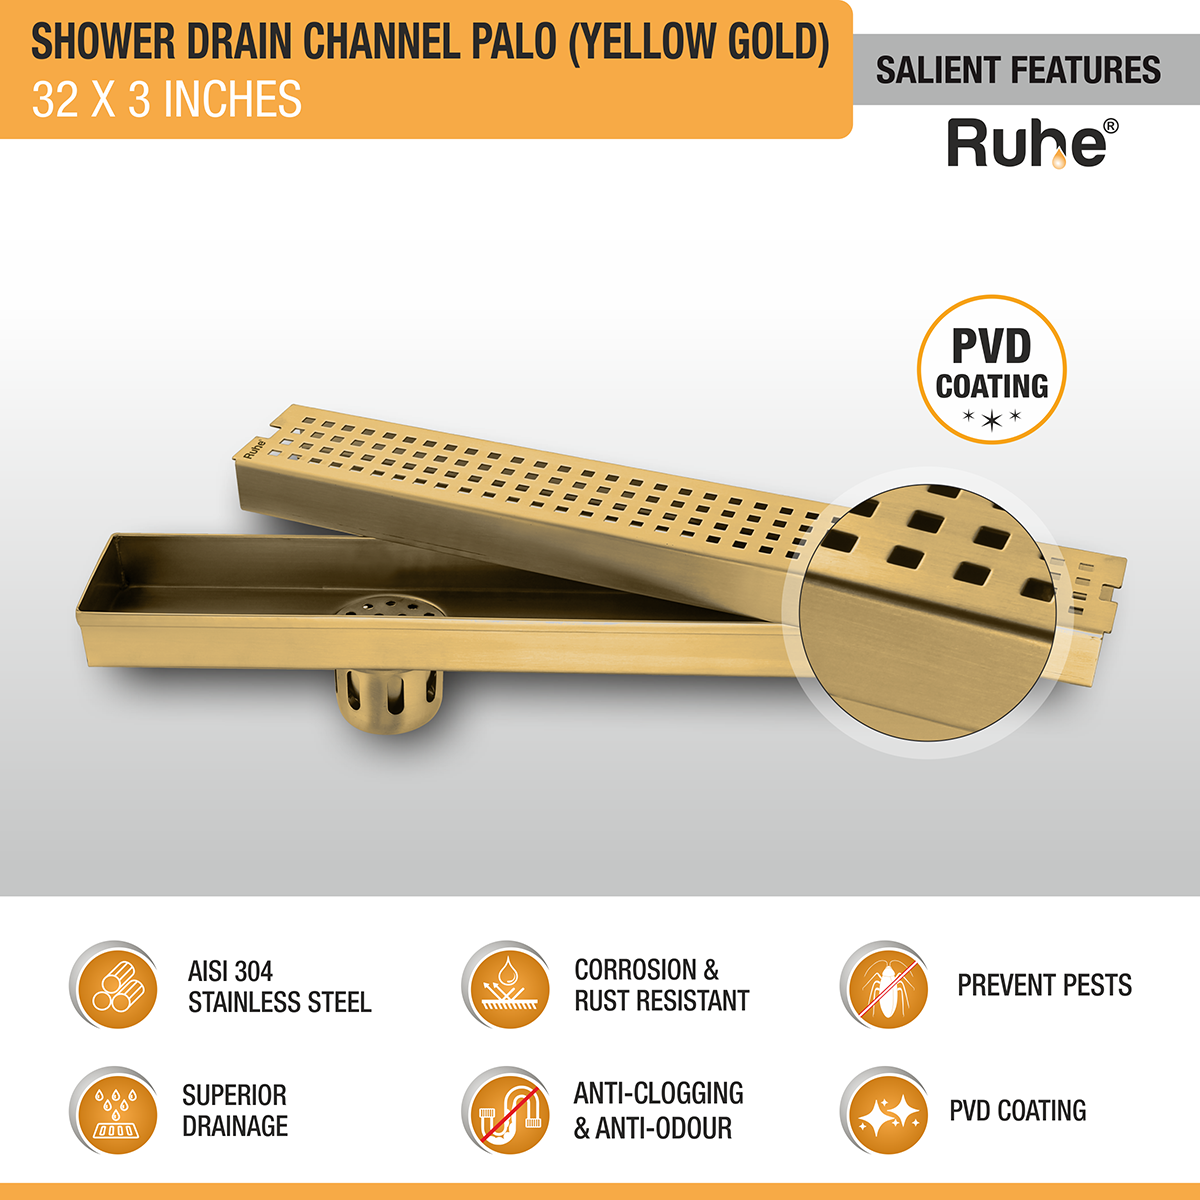 Palo Shower Drain Channel (32 x 3 Inches) YELLOW GOLD features